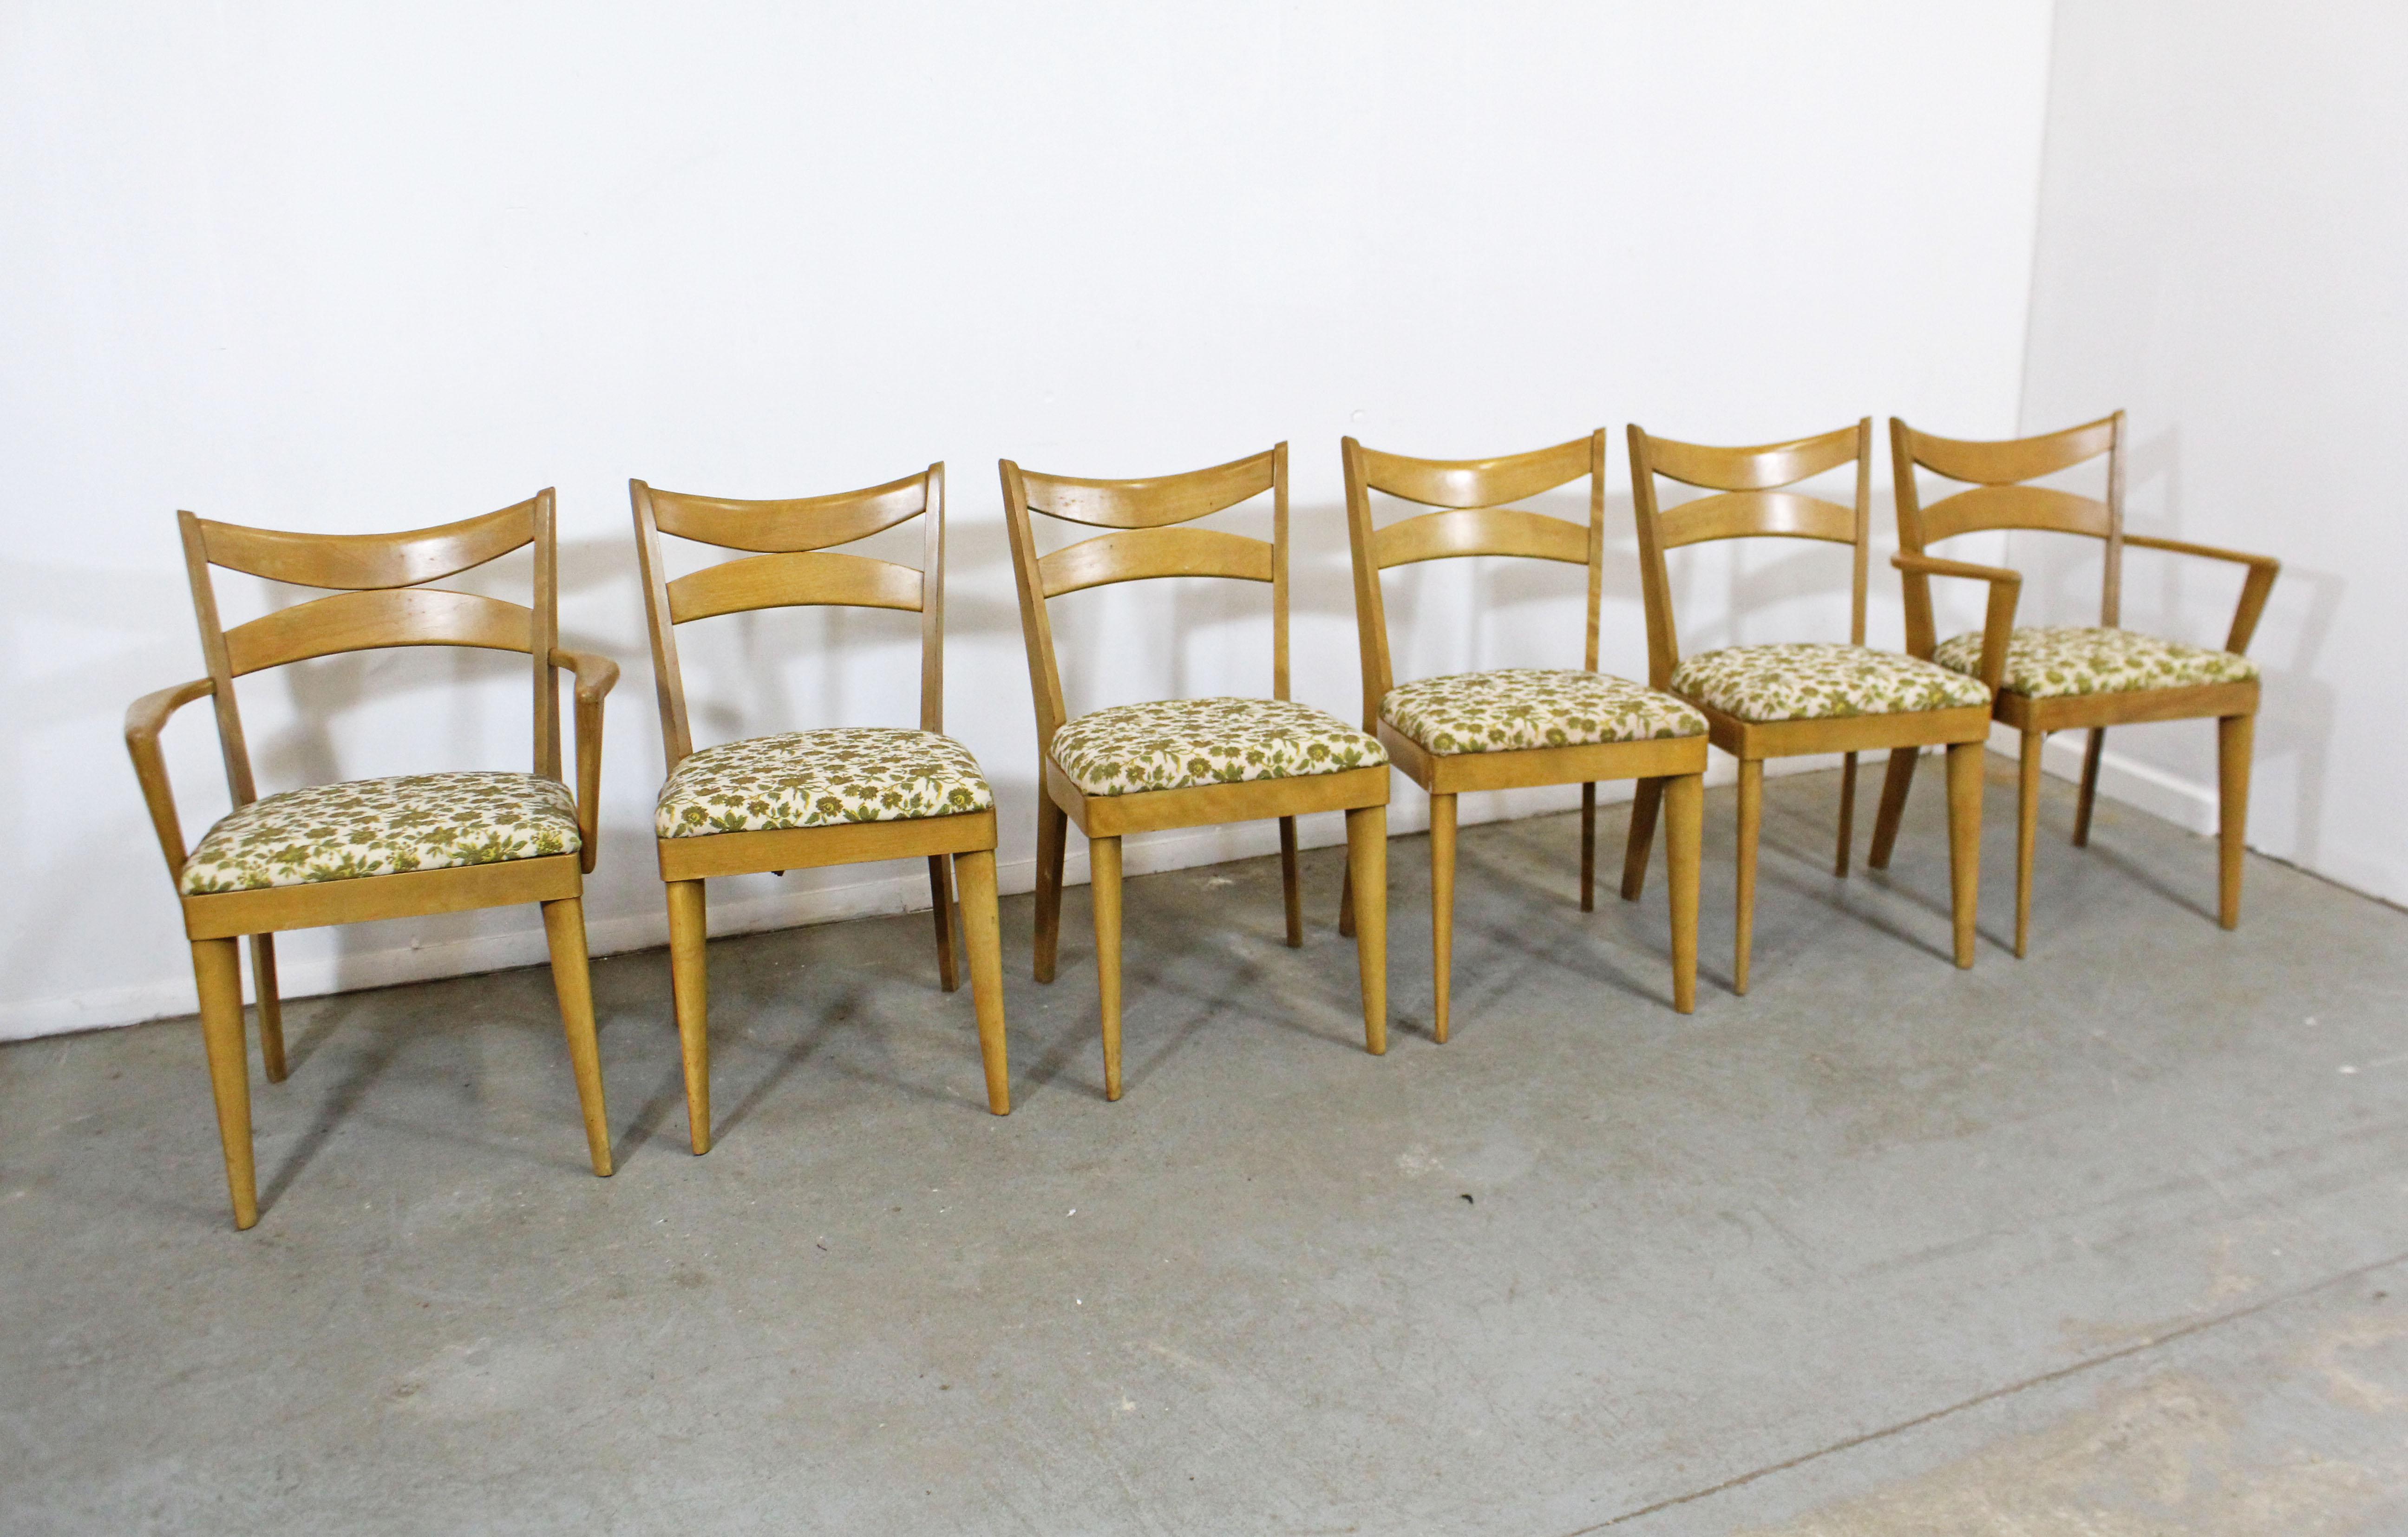 What a find. Offered is a set of 6 Heywood Wakefield dining chairs with floral upholstery in a wheat finish. The set is in decent condition, showing age wear, including surface scratches, stains. They can stand to be refinished and reupholstered.